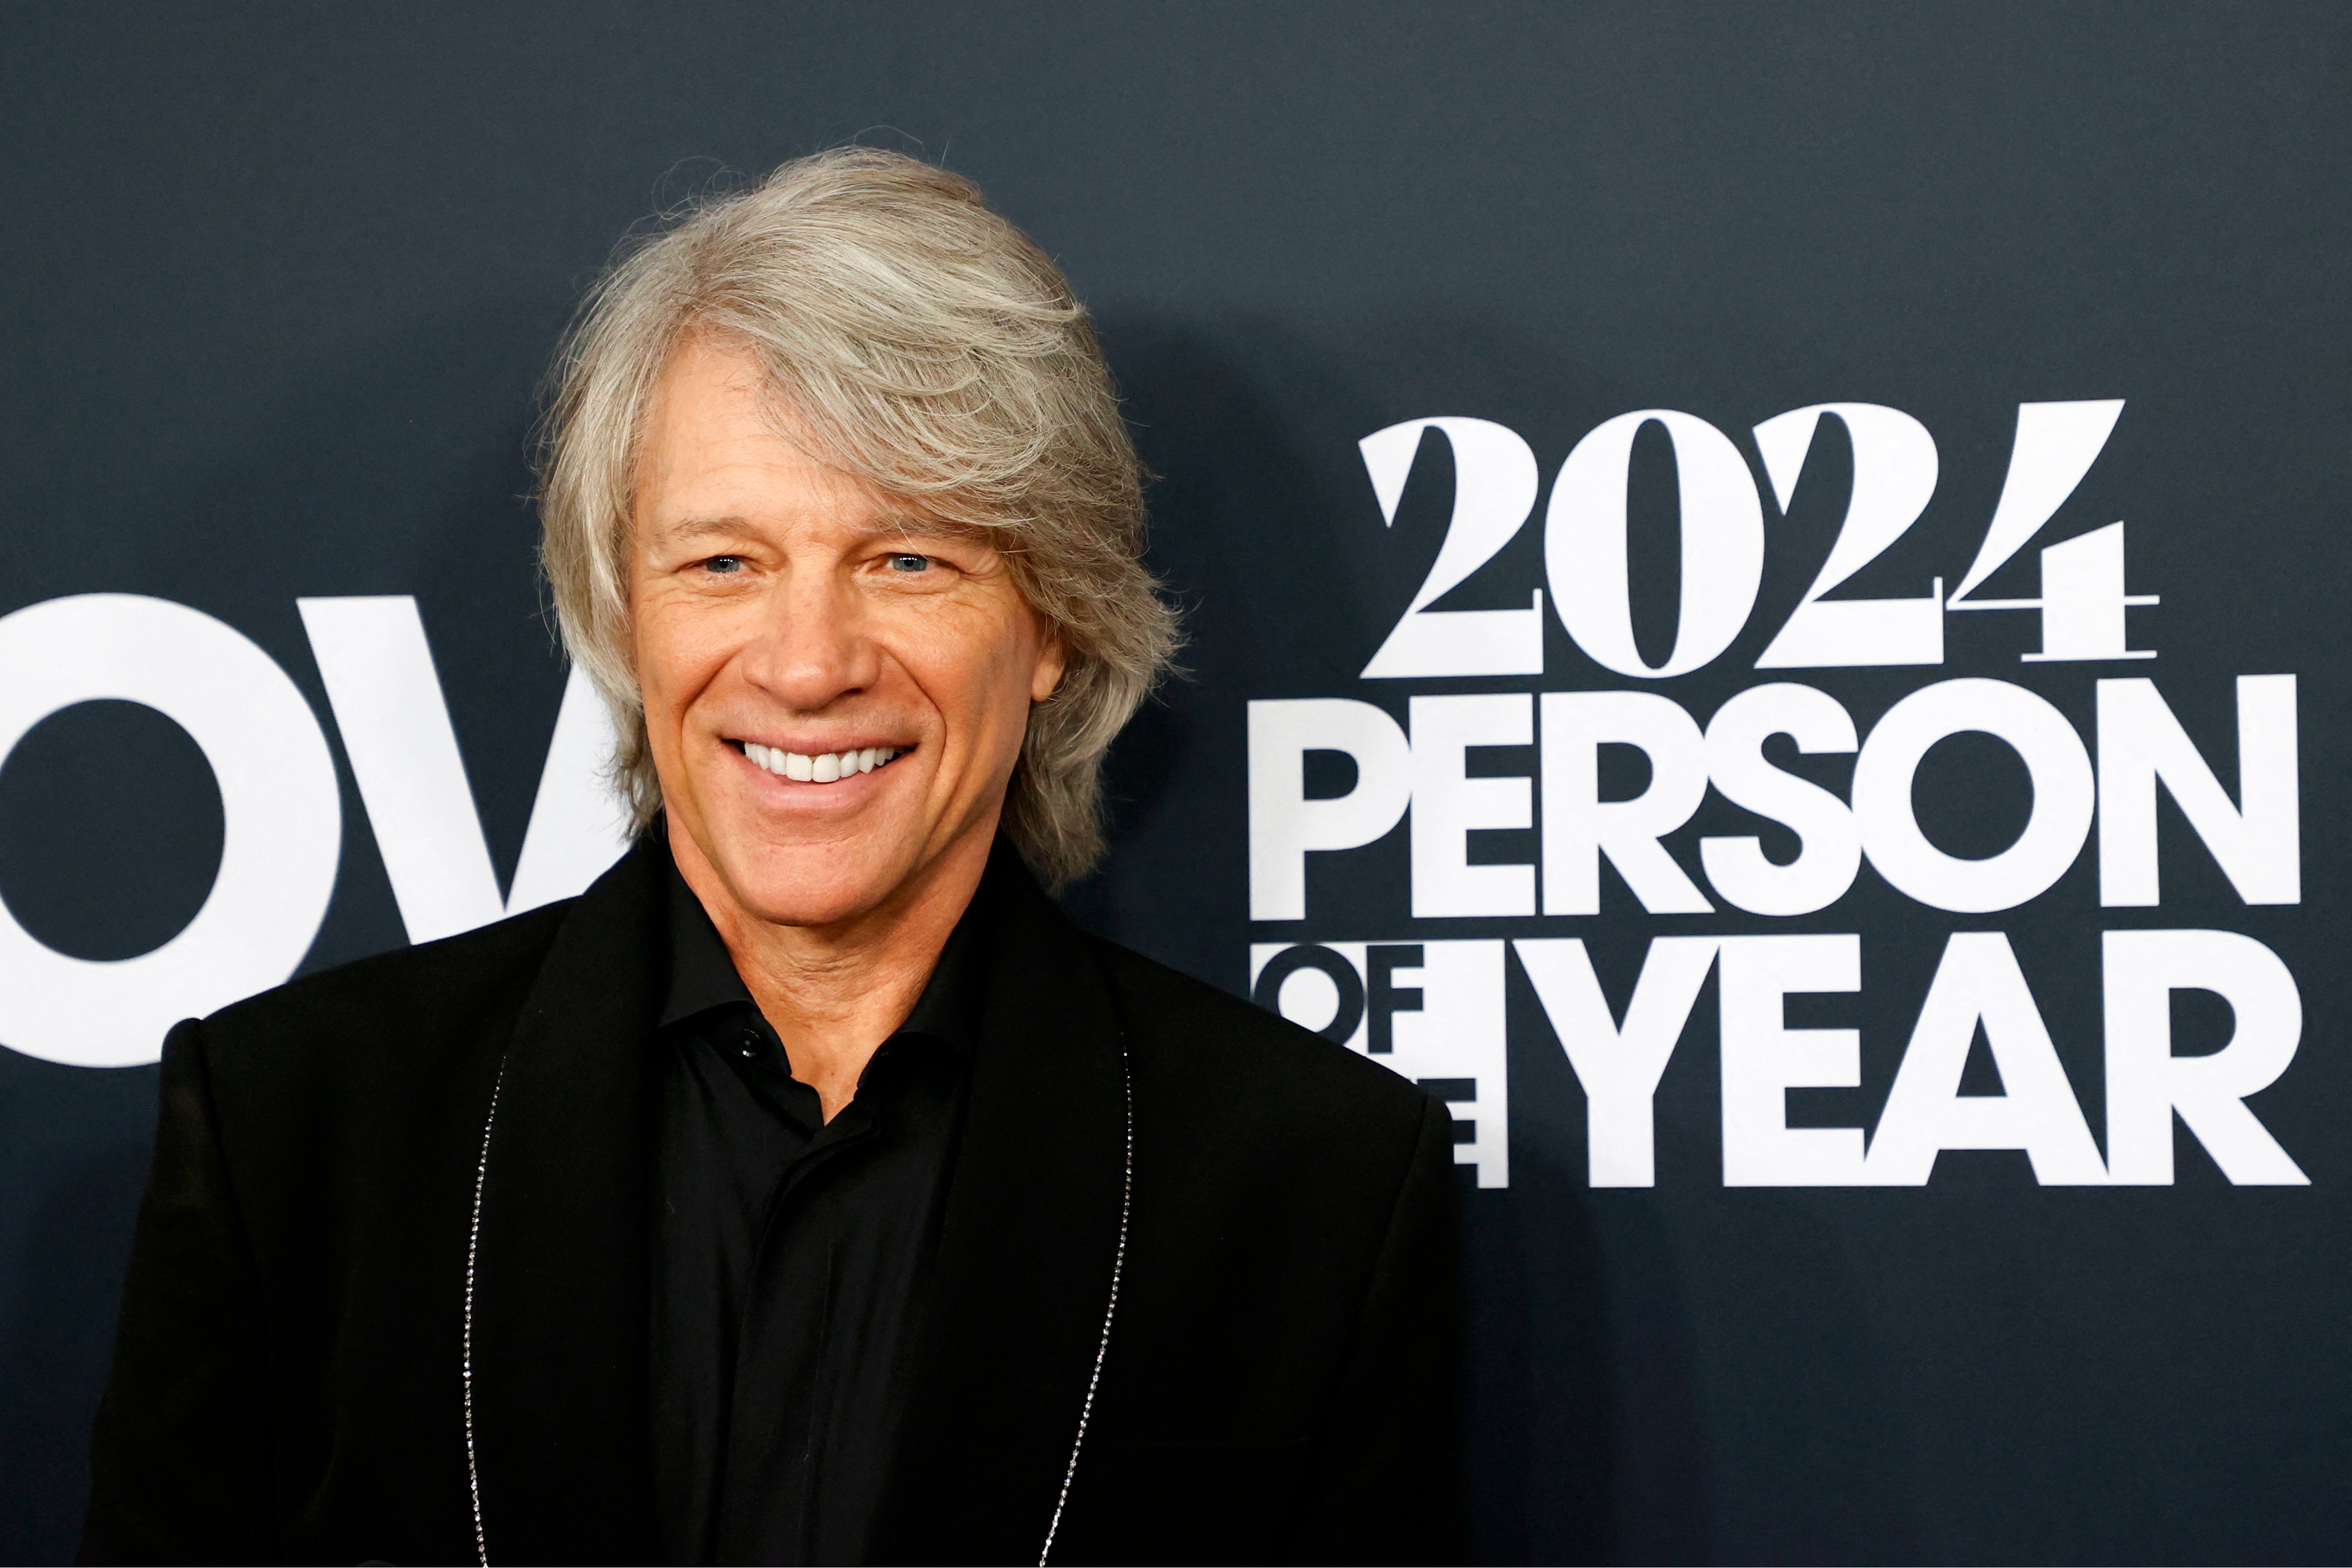 Jon Bon Jovi attends the MusiCares Person of the Year gala in Los Angeles on 2 February 2024